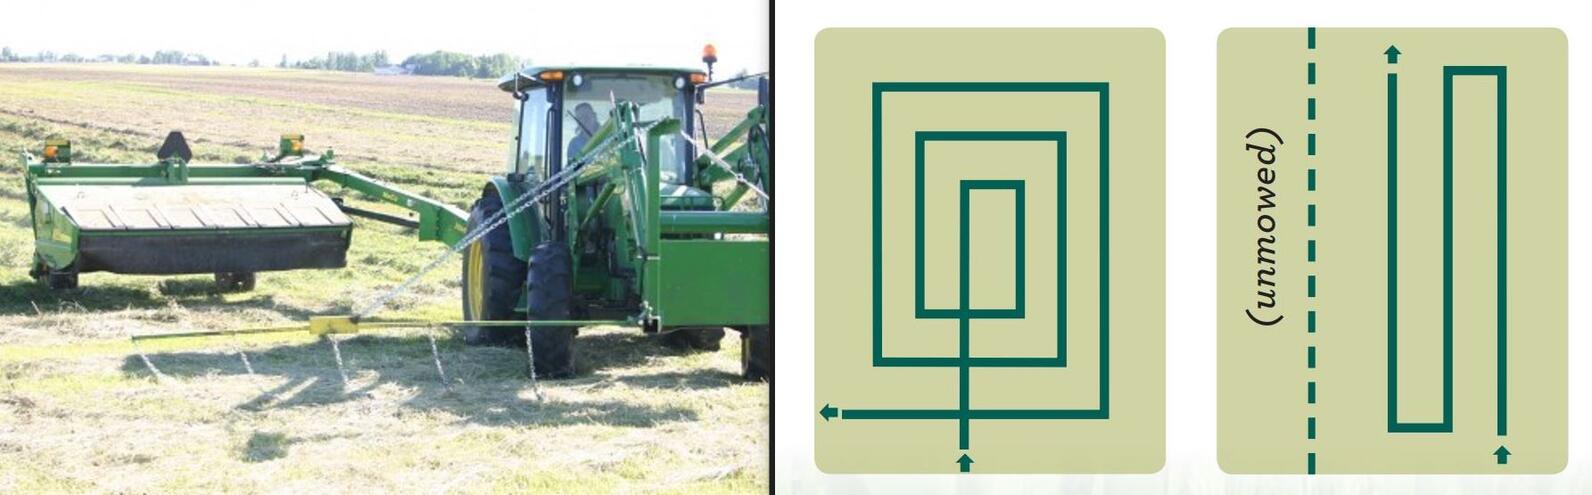 an image of a flushing bar and graphic drawing of hayfield mowing pattern